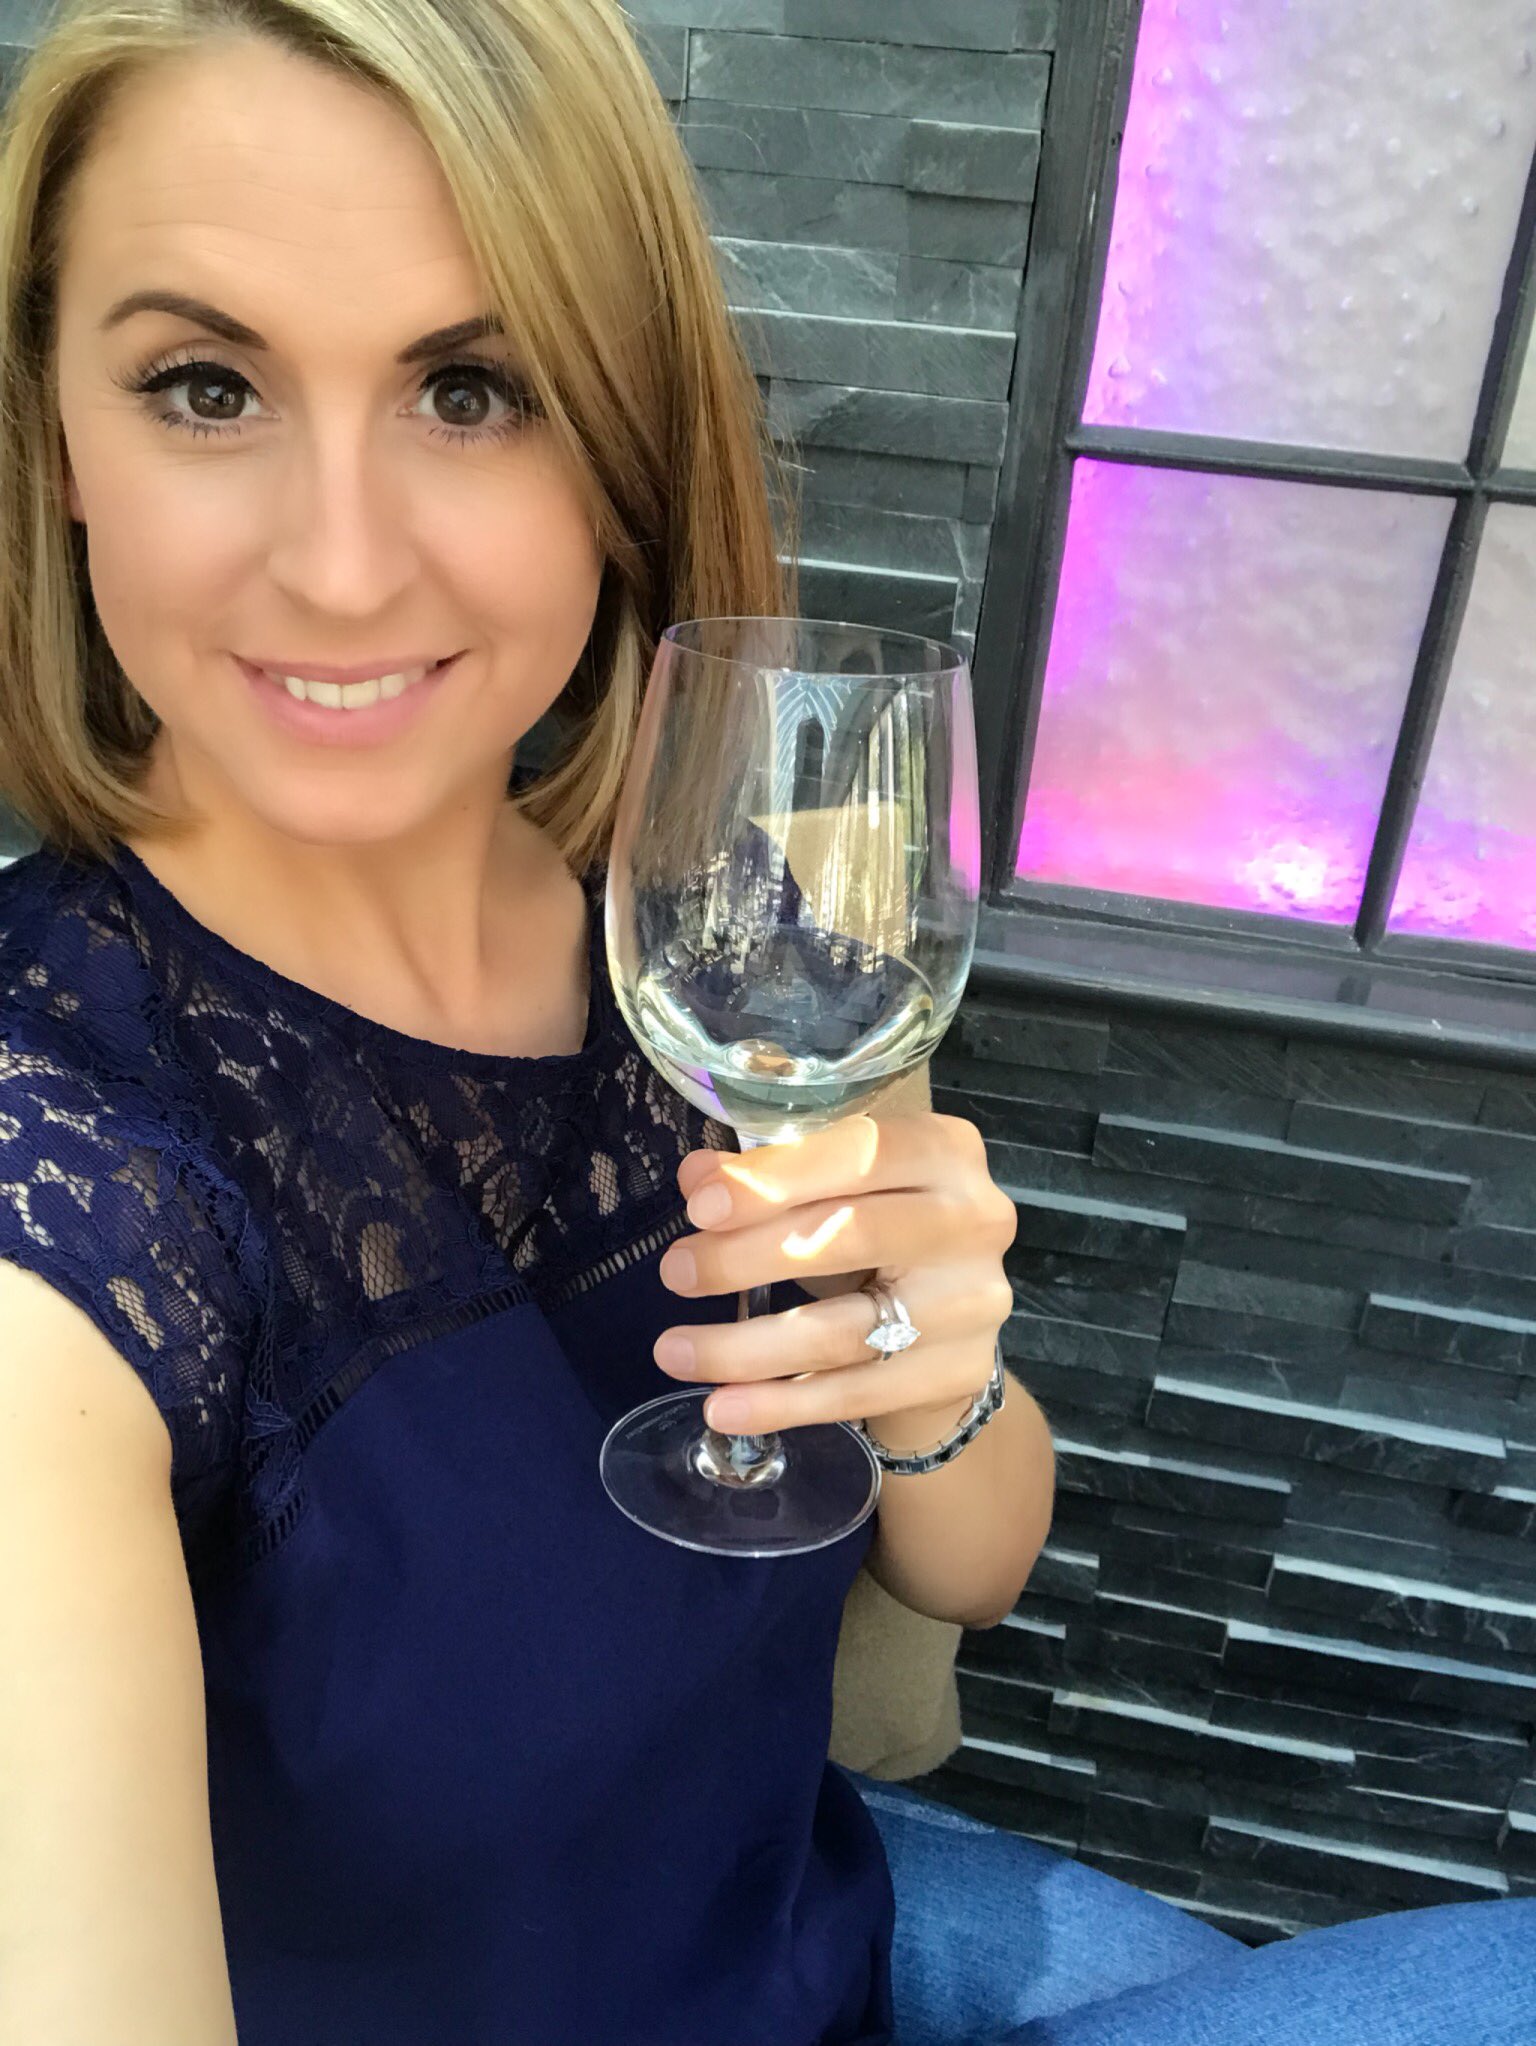 Louise Jenson On Twitter A Cheeky Glass Of Wine At The Country Club Today Enjoying The ☀️ Xxx…